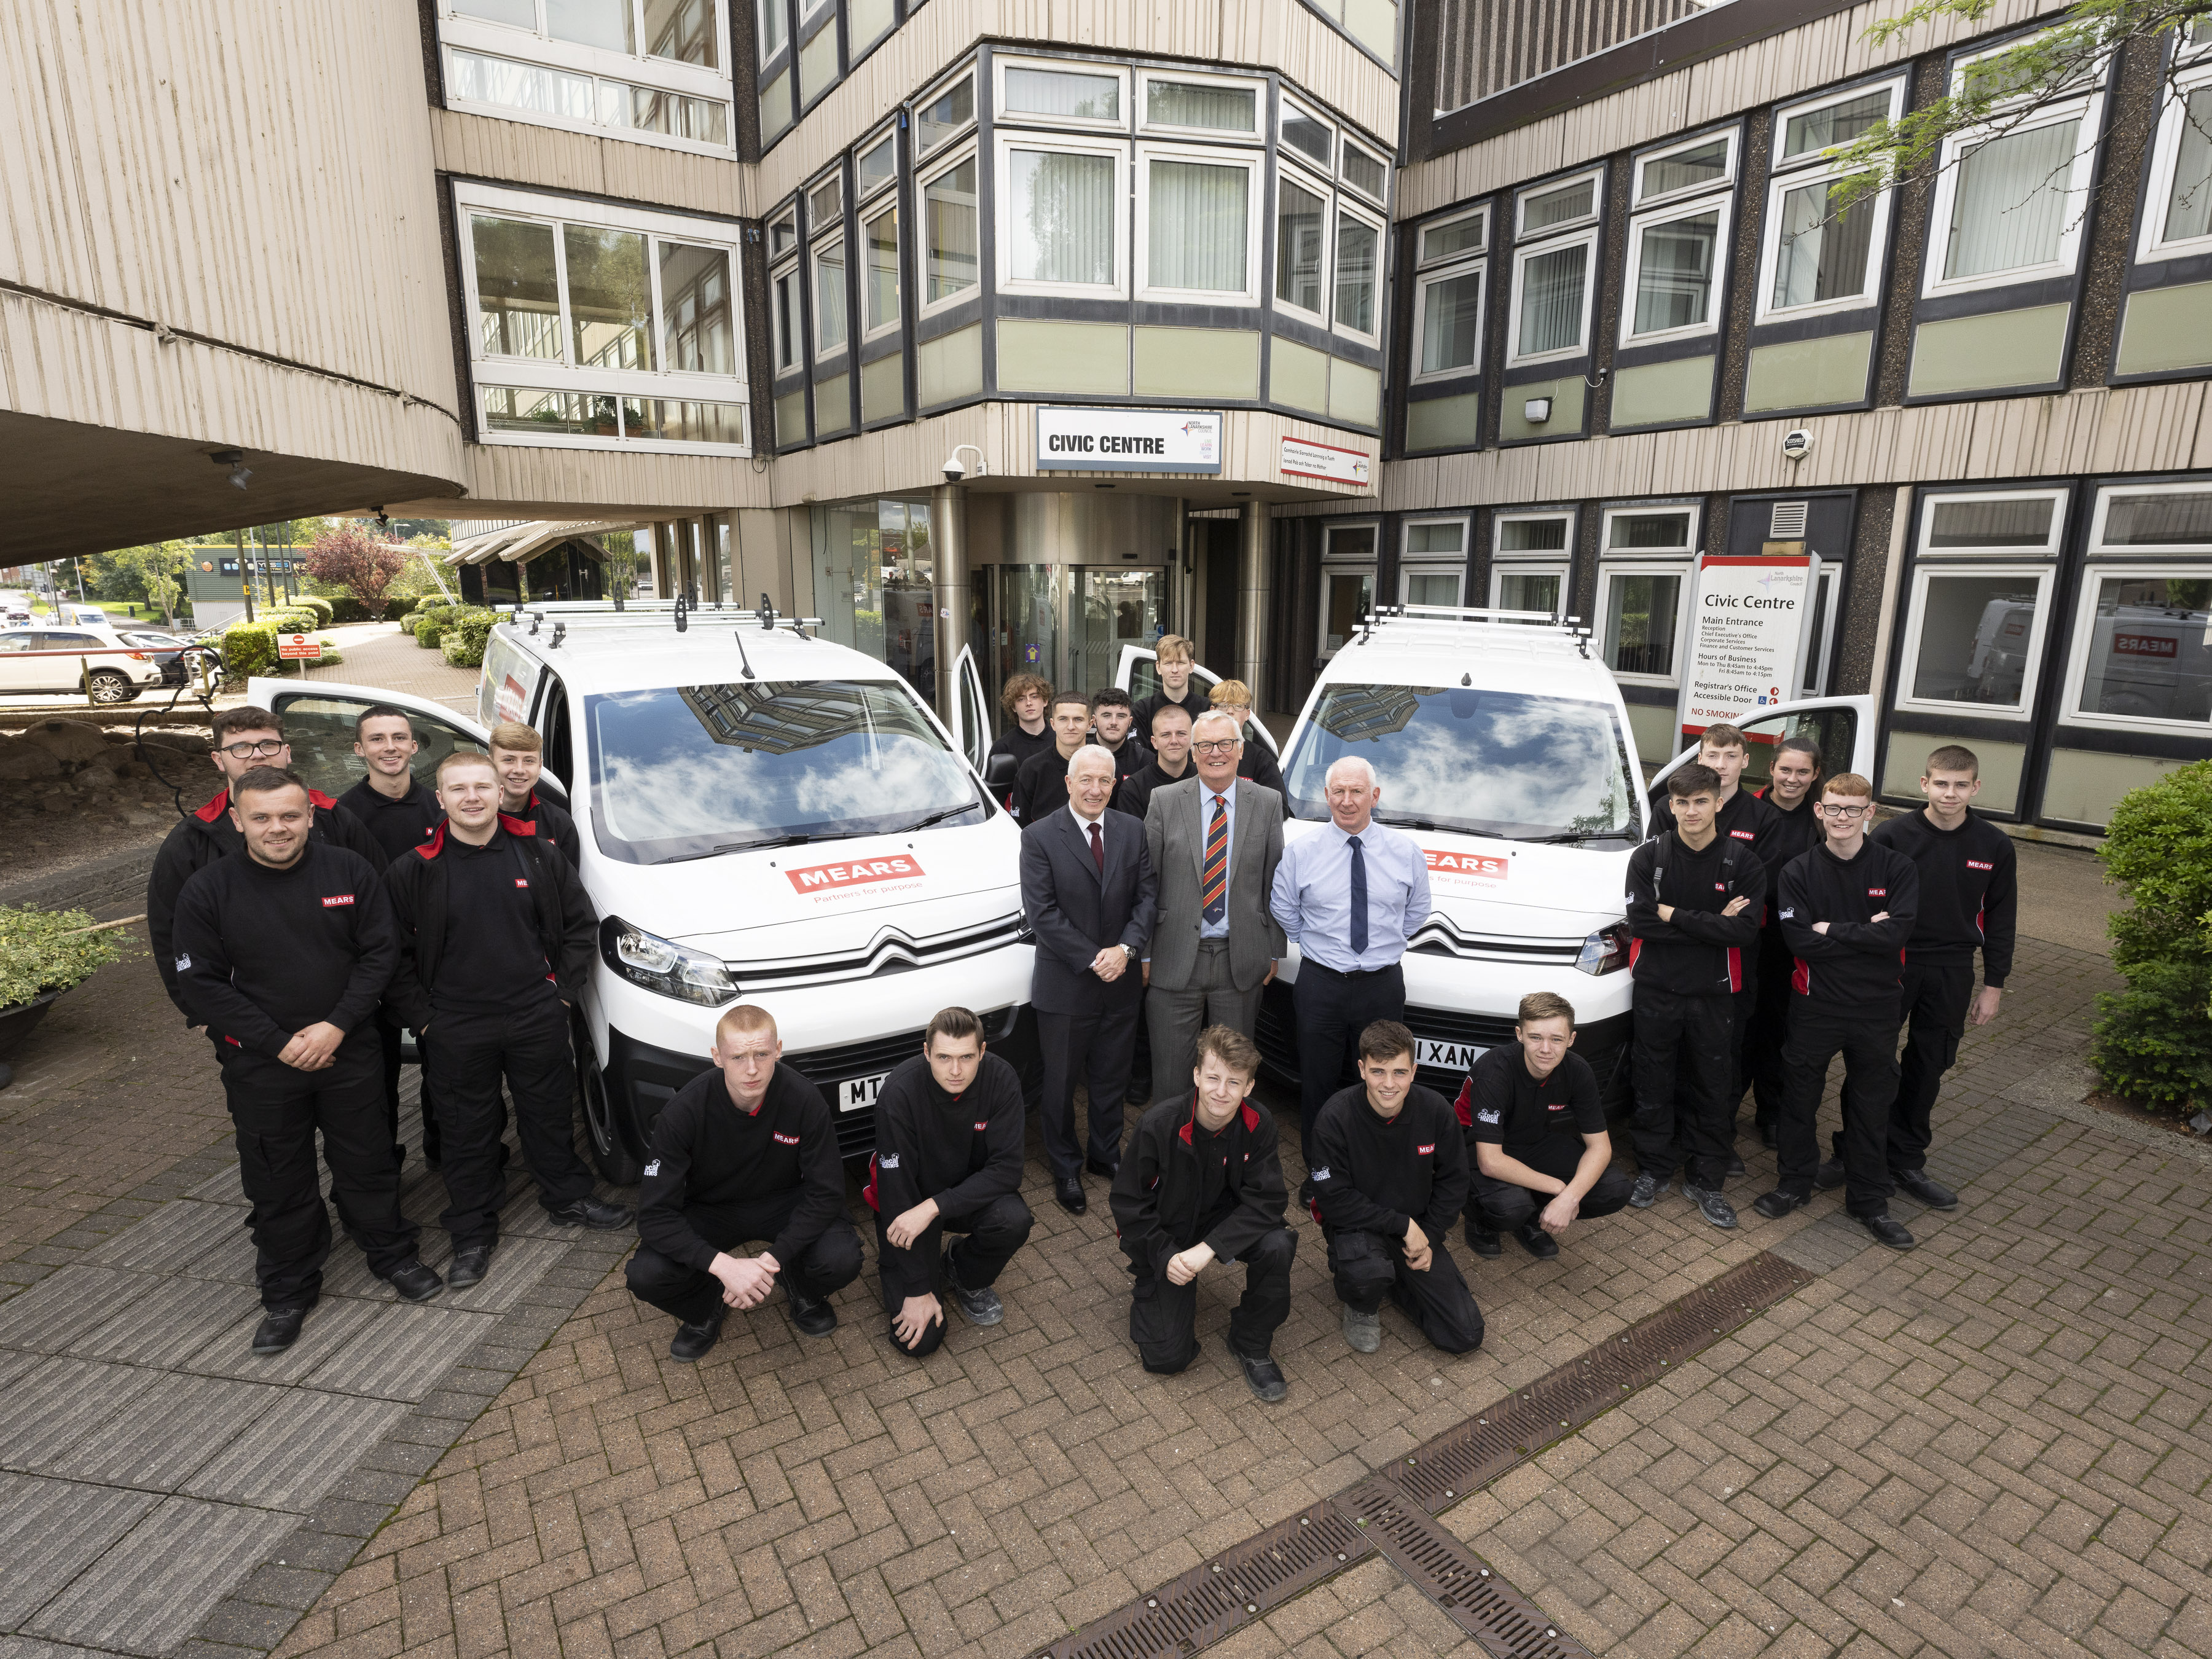 Mears partnership helps boost skills of 22 apprentices across North Lanarkshire